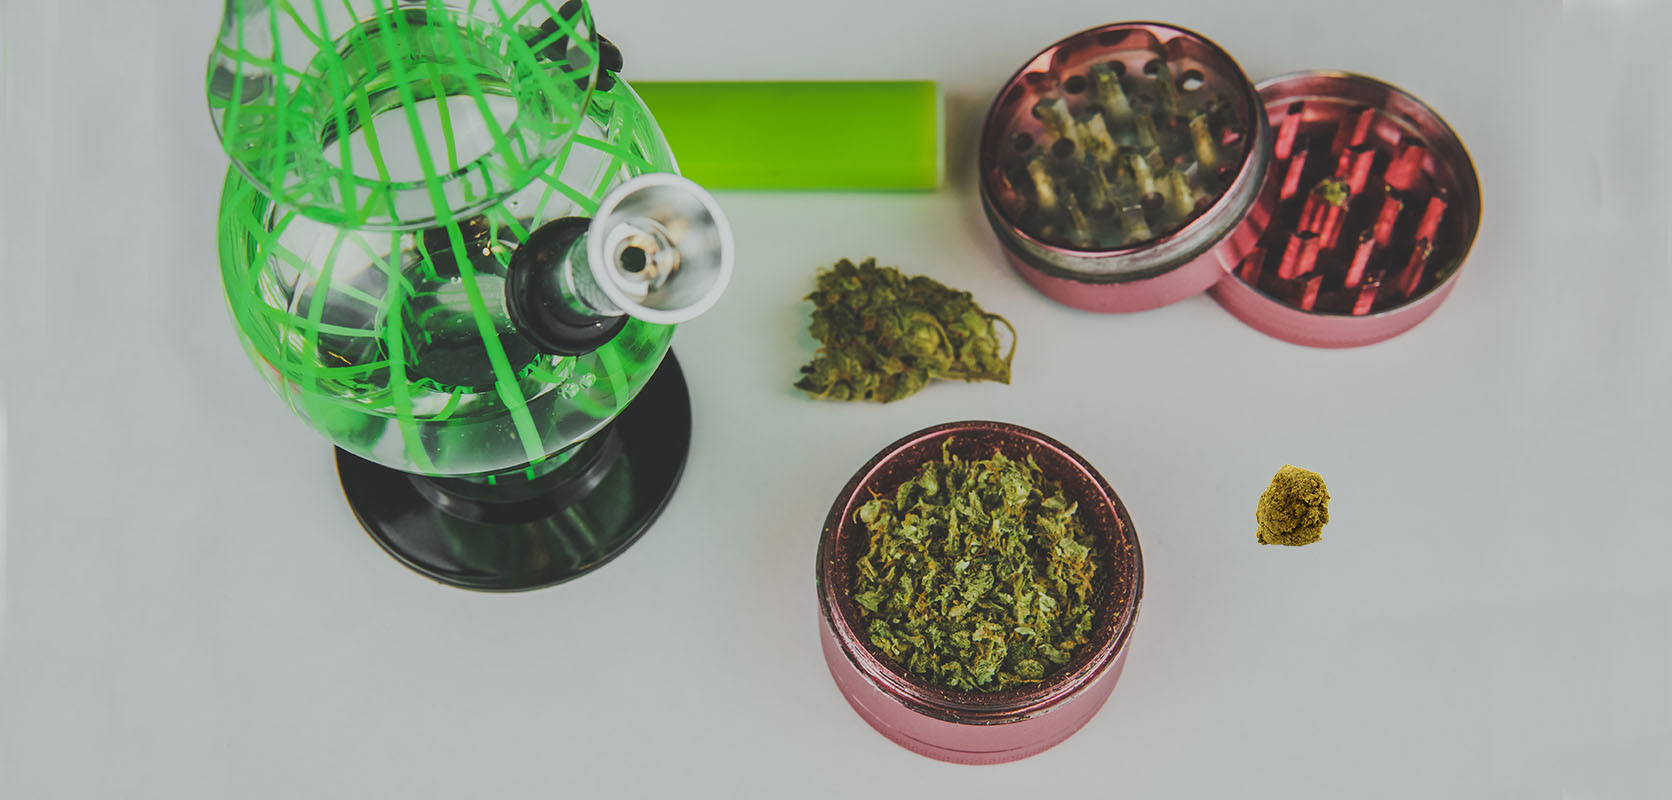 image of cannabis weed, bongs, and grinders. buy weed online in canada from mail order marijuana dispensary